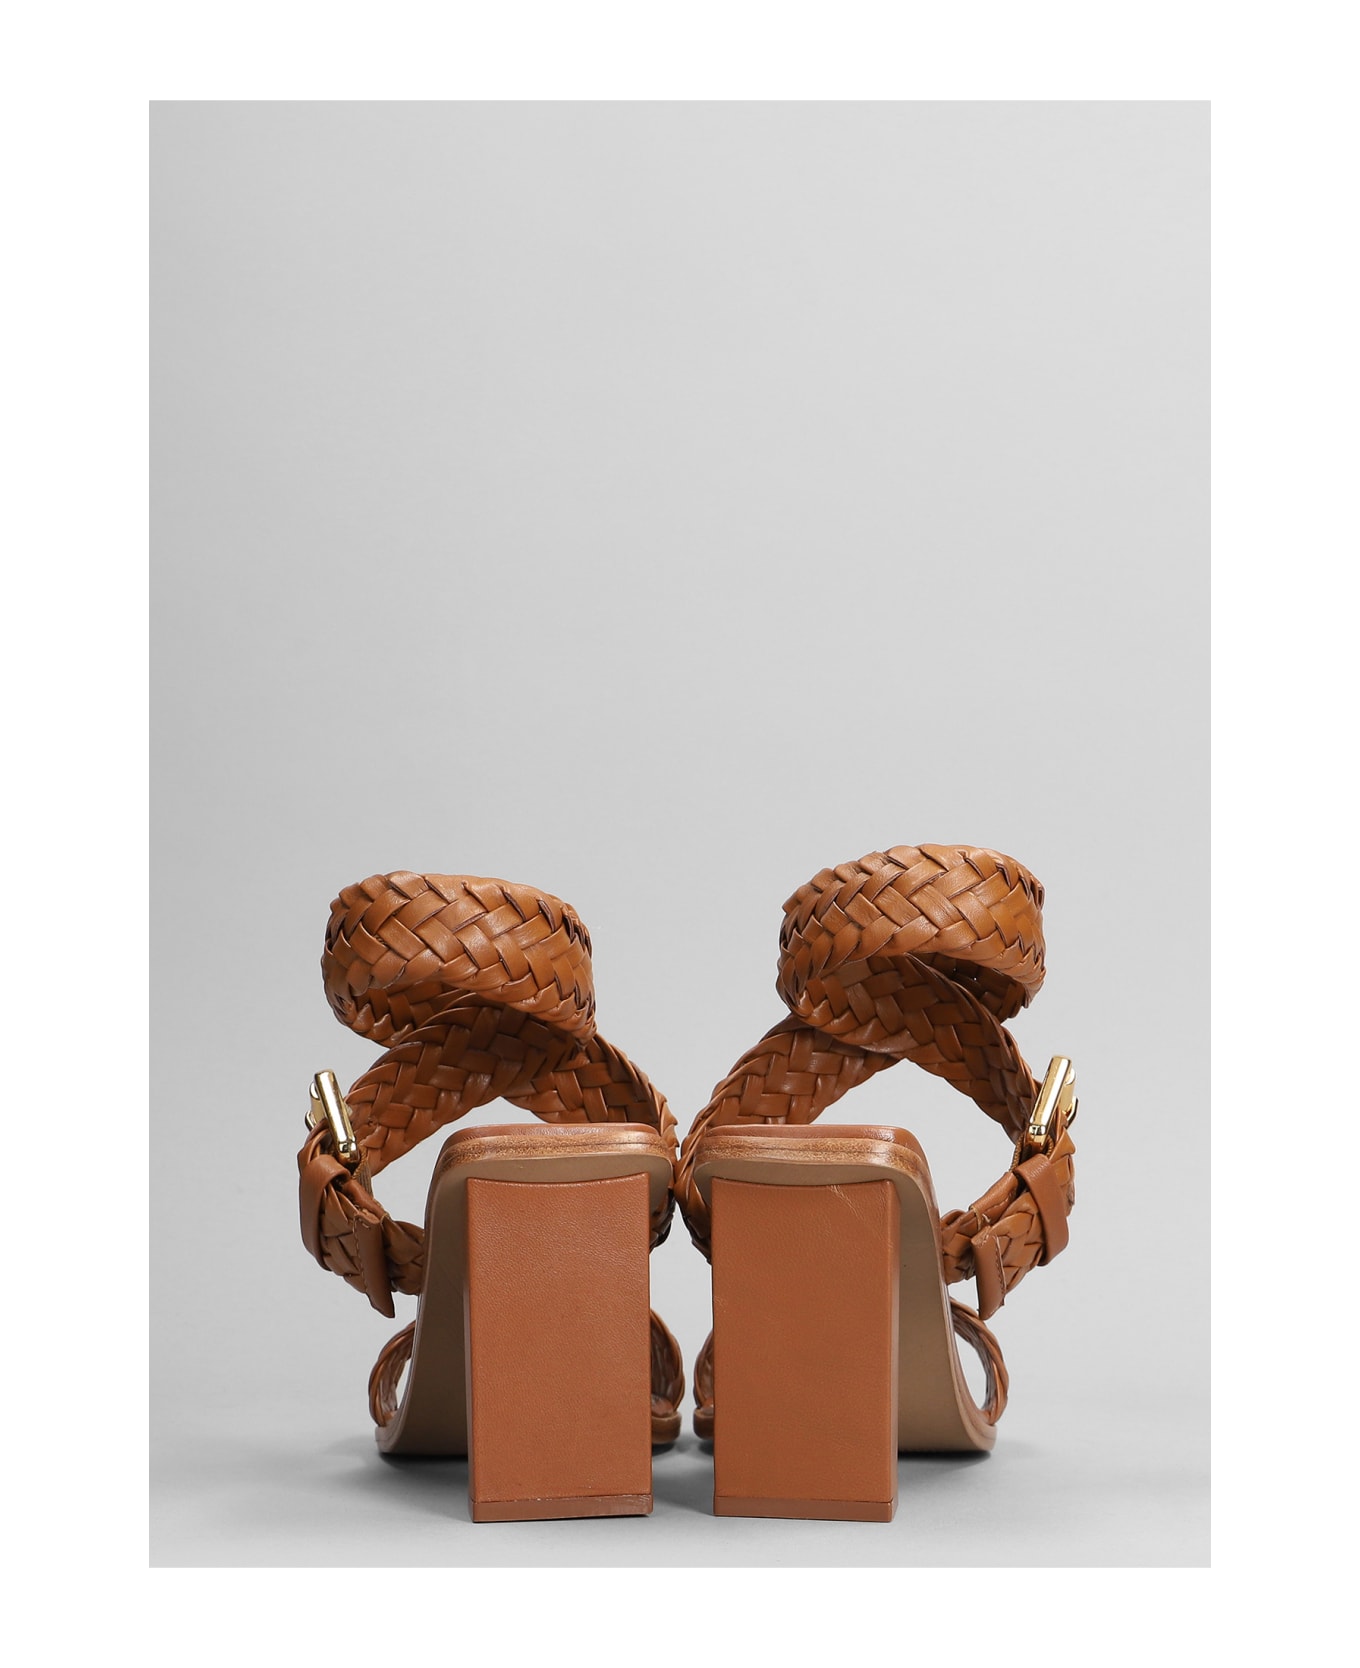 Schutz Sandals In Leather Color Leather - leather color